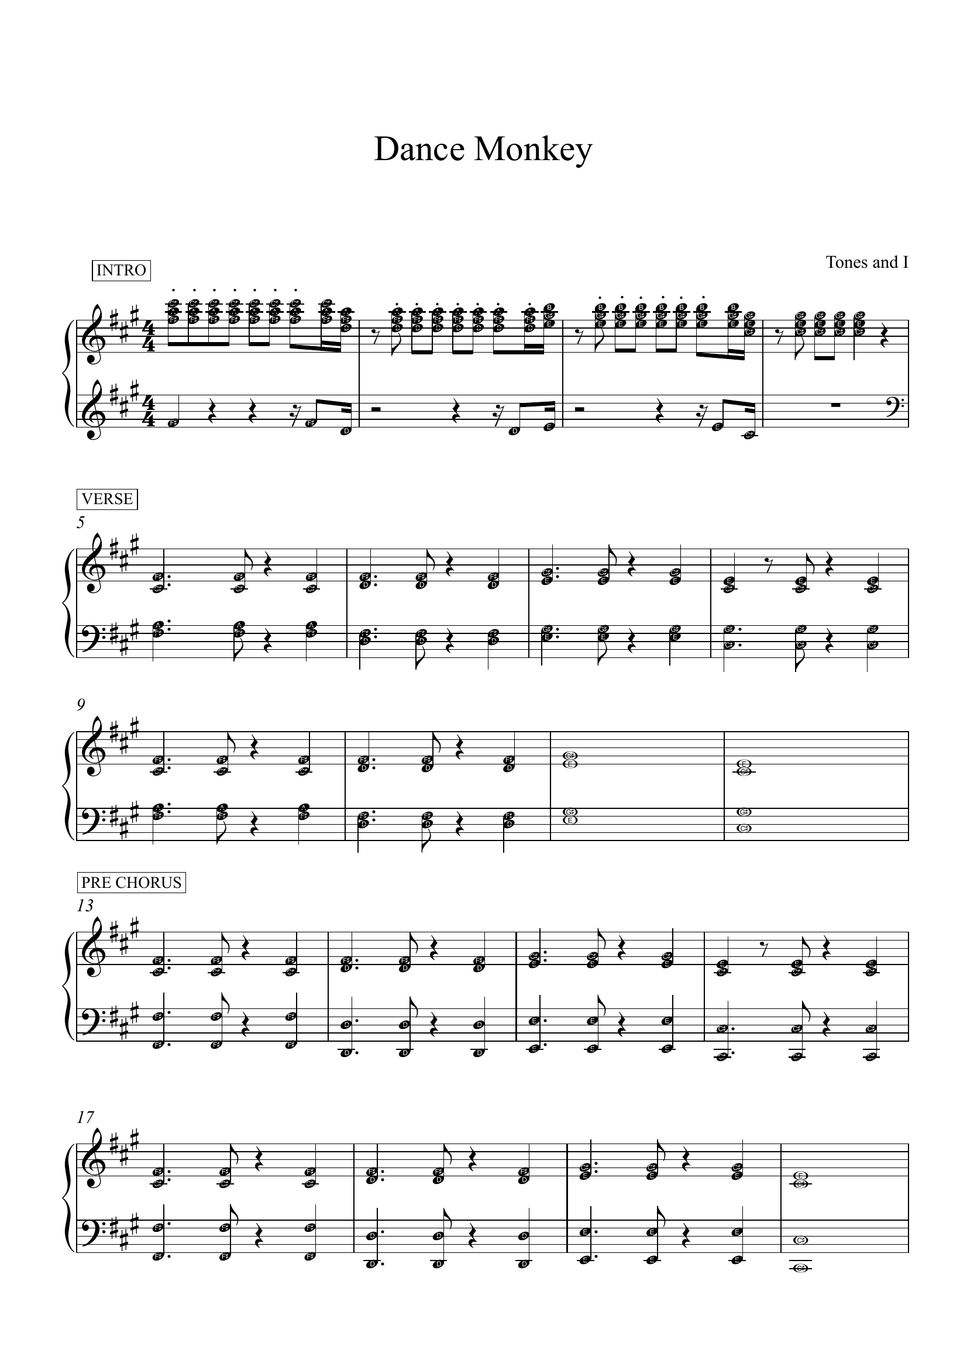 Tones and I - Dance Monkey (Piano Accompaniment) Sheets by BitBit